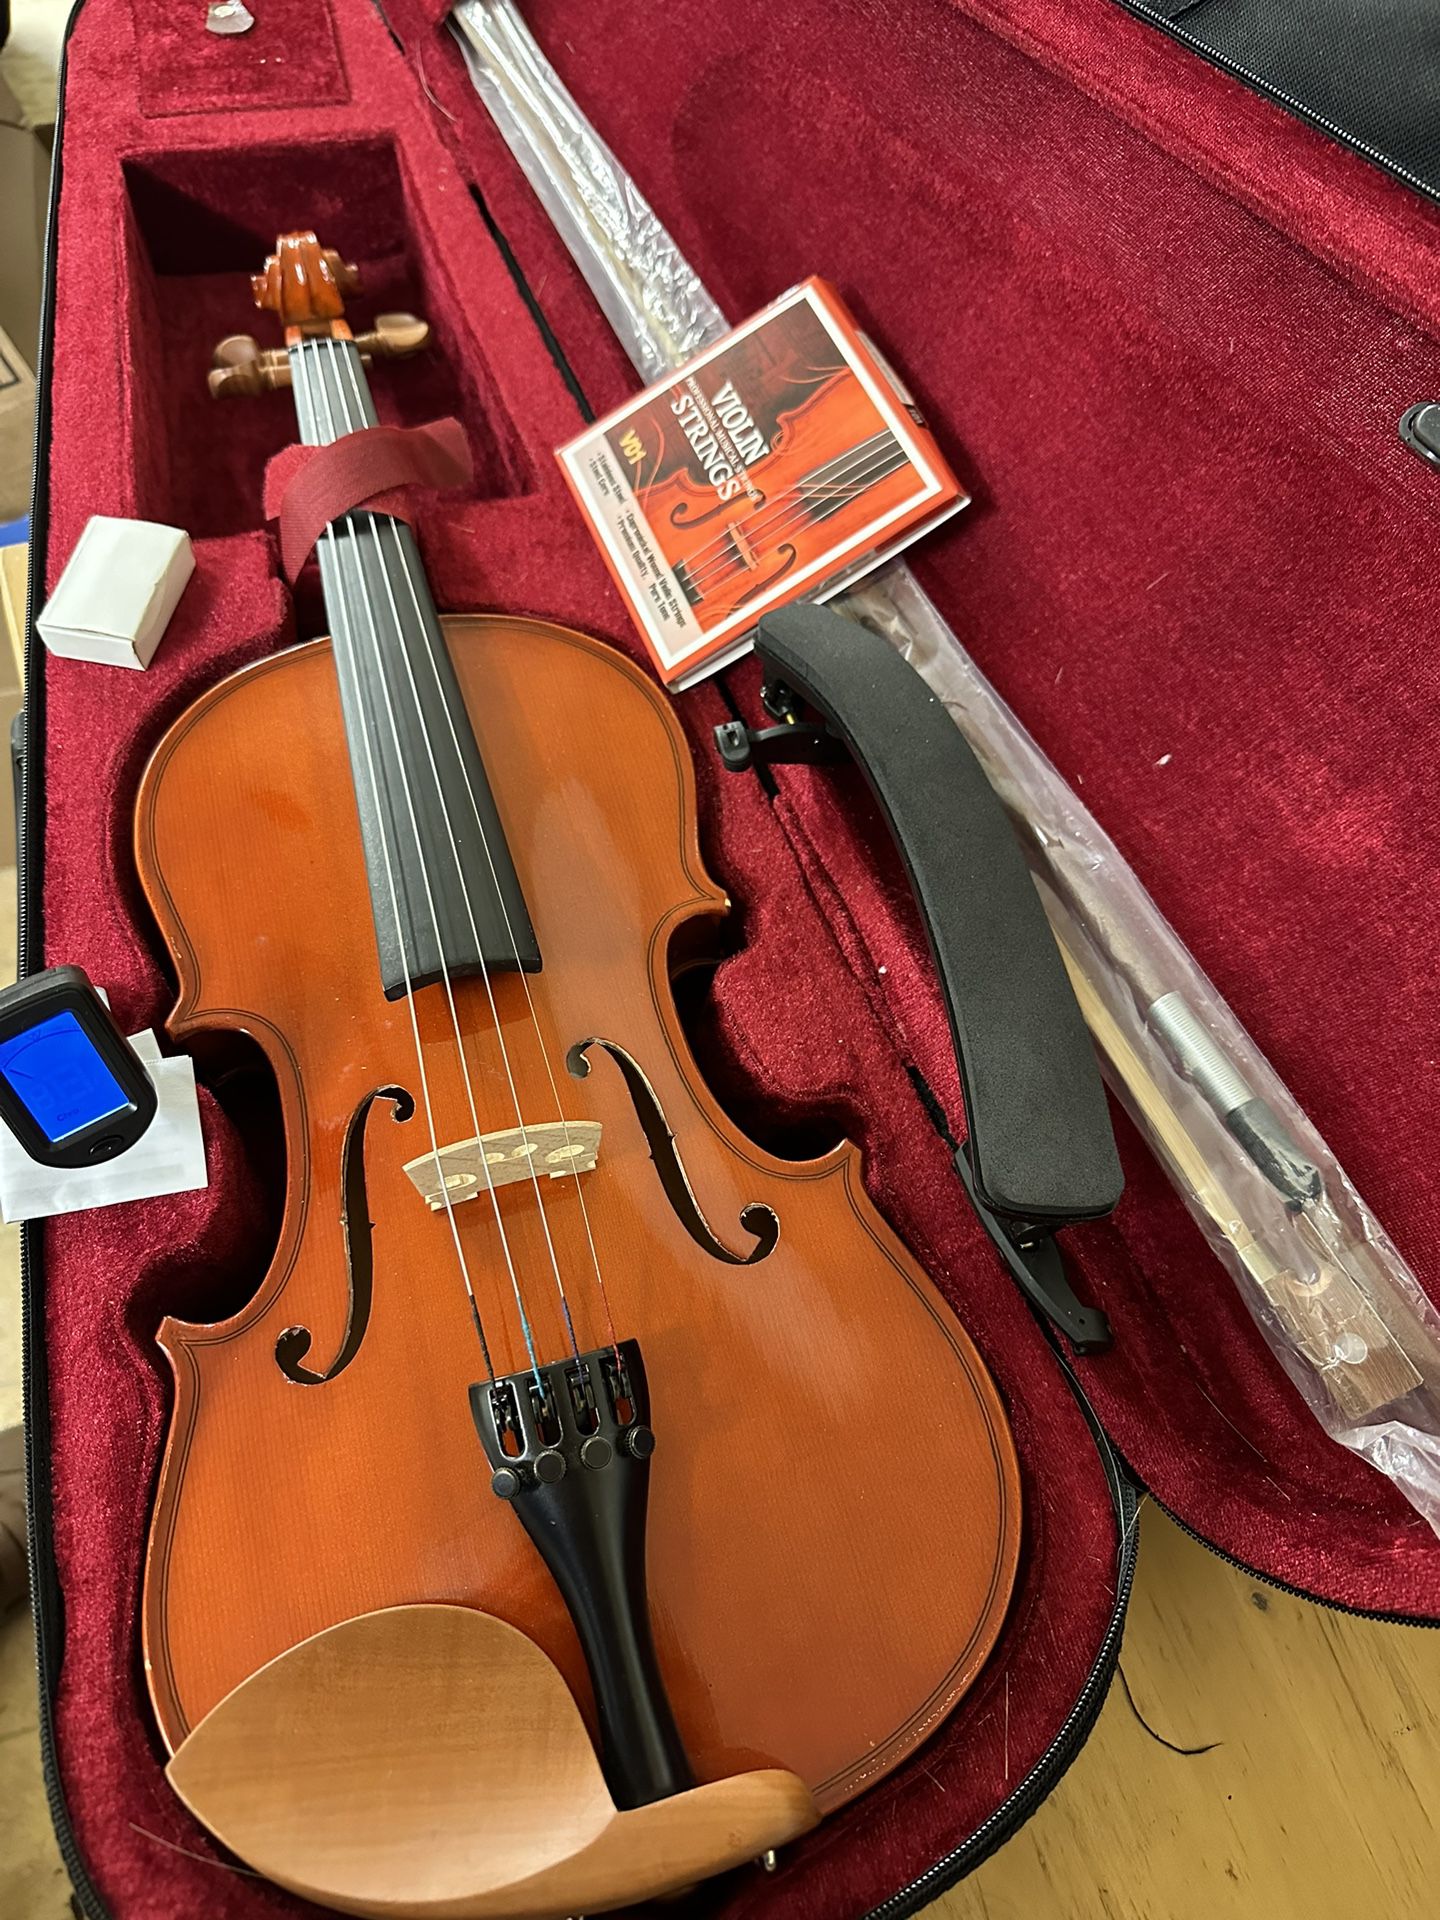 4/4 Full Size Violin with New Bow, Digital Tuner, Shoulder Rest, Extra Strings $150 Firm